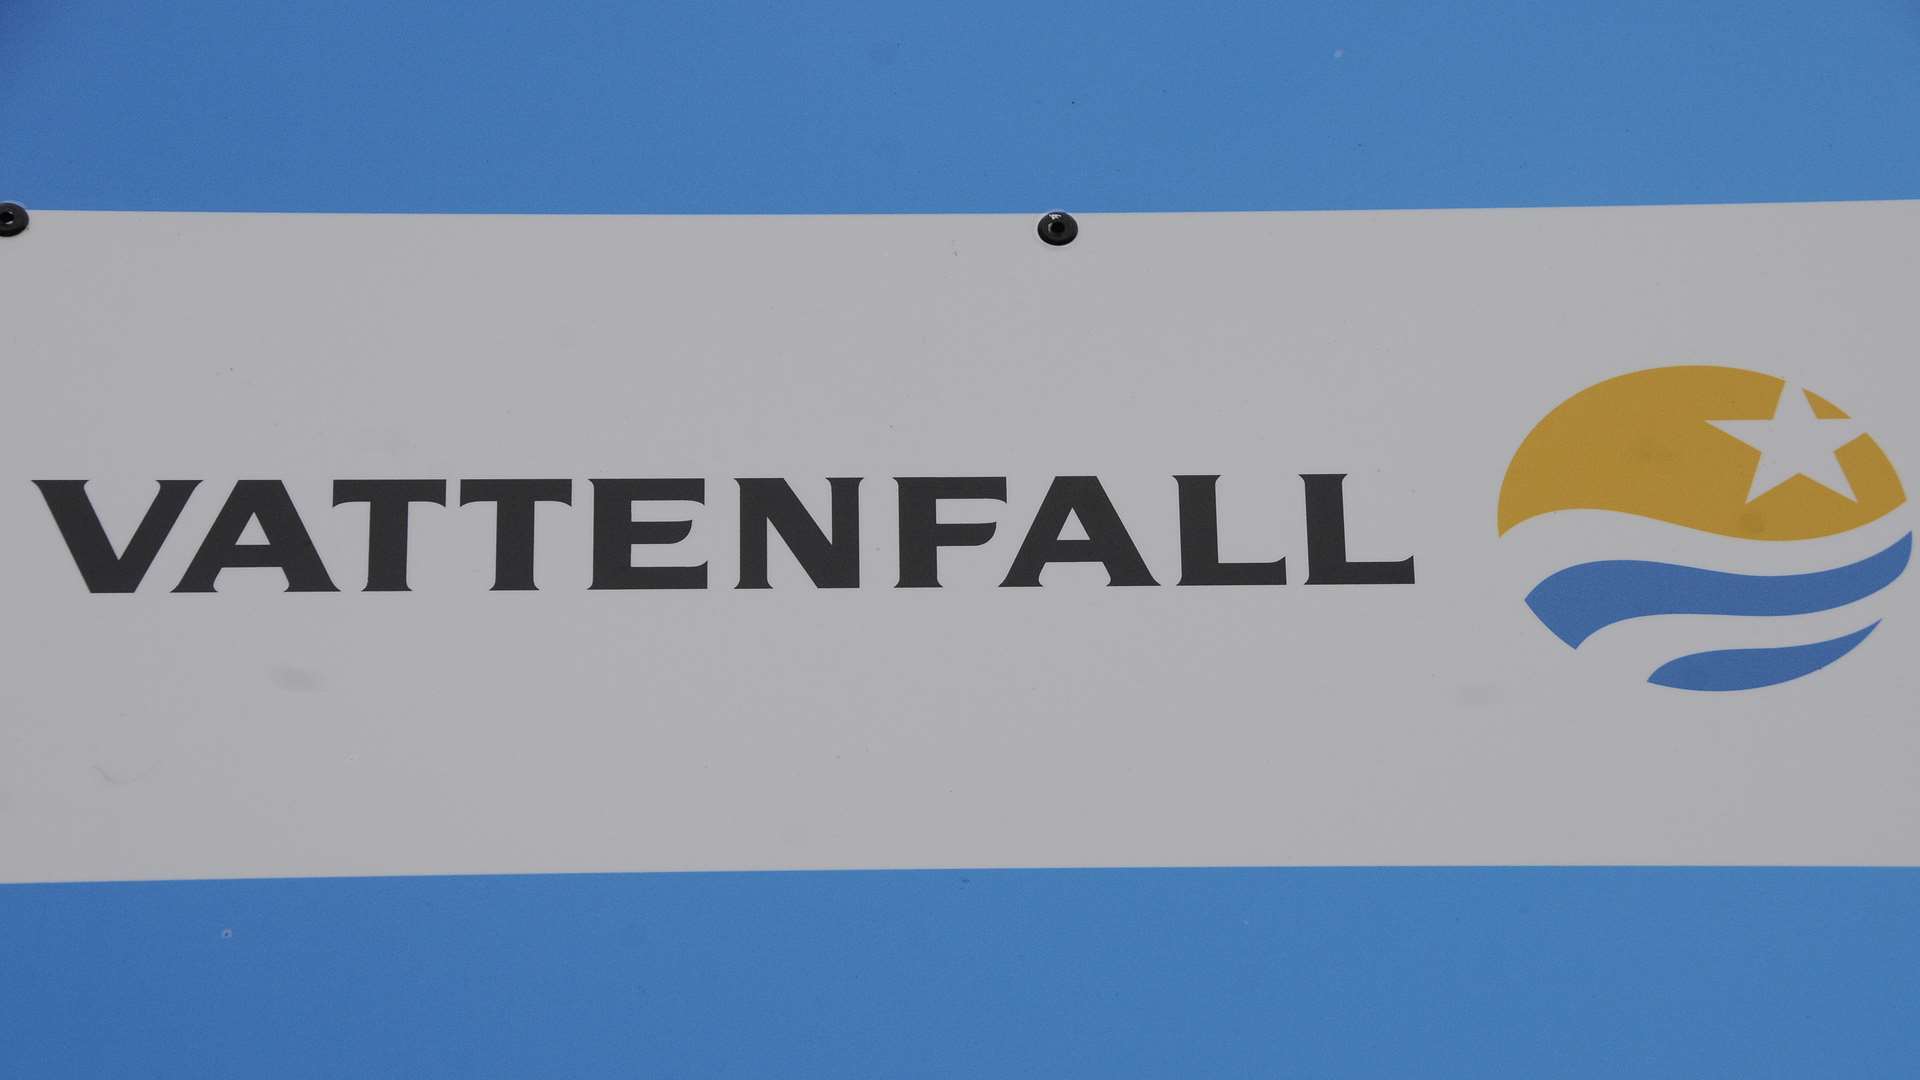 Vattenfall is hosting information sessions for residents who want to learn more